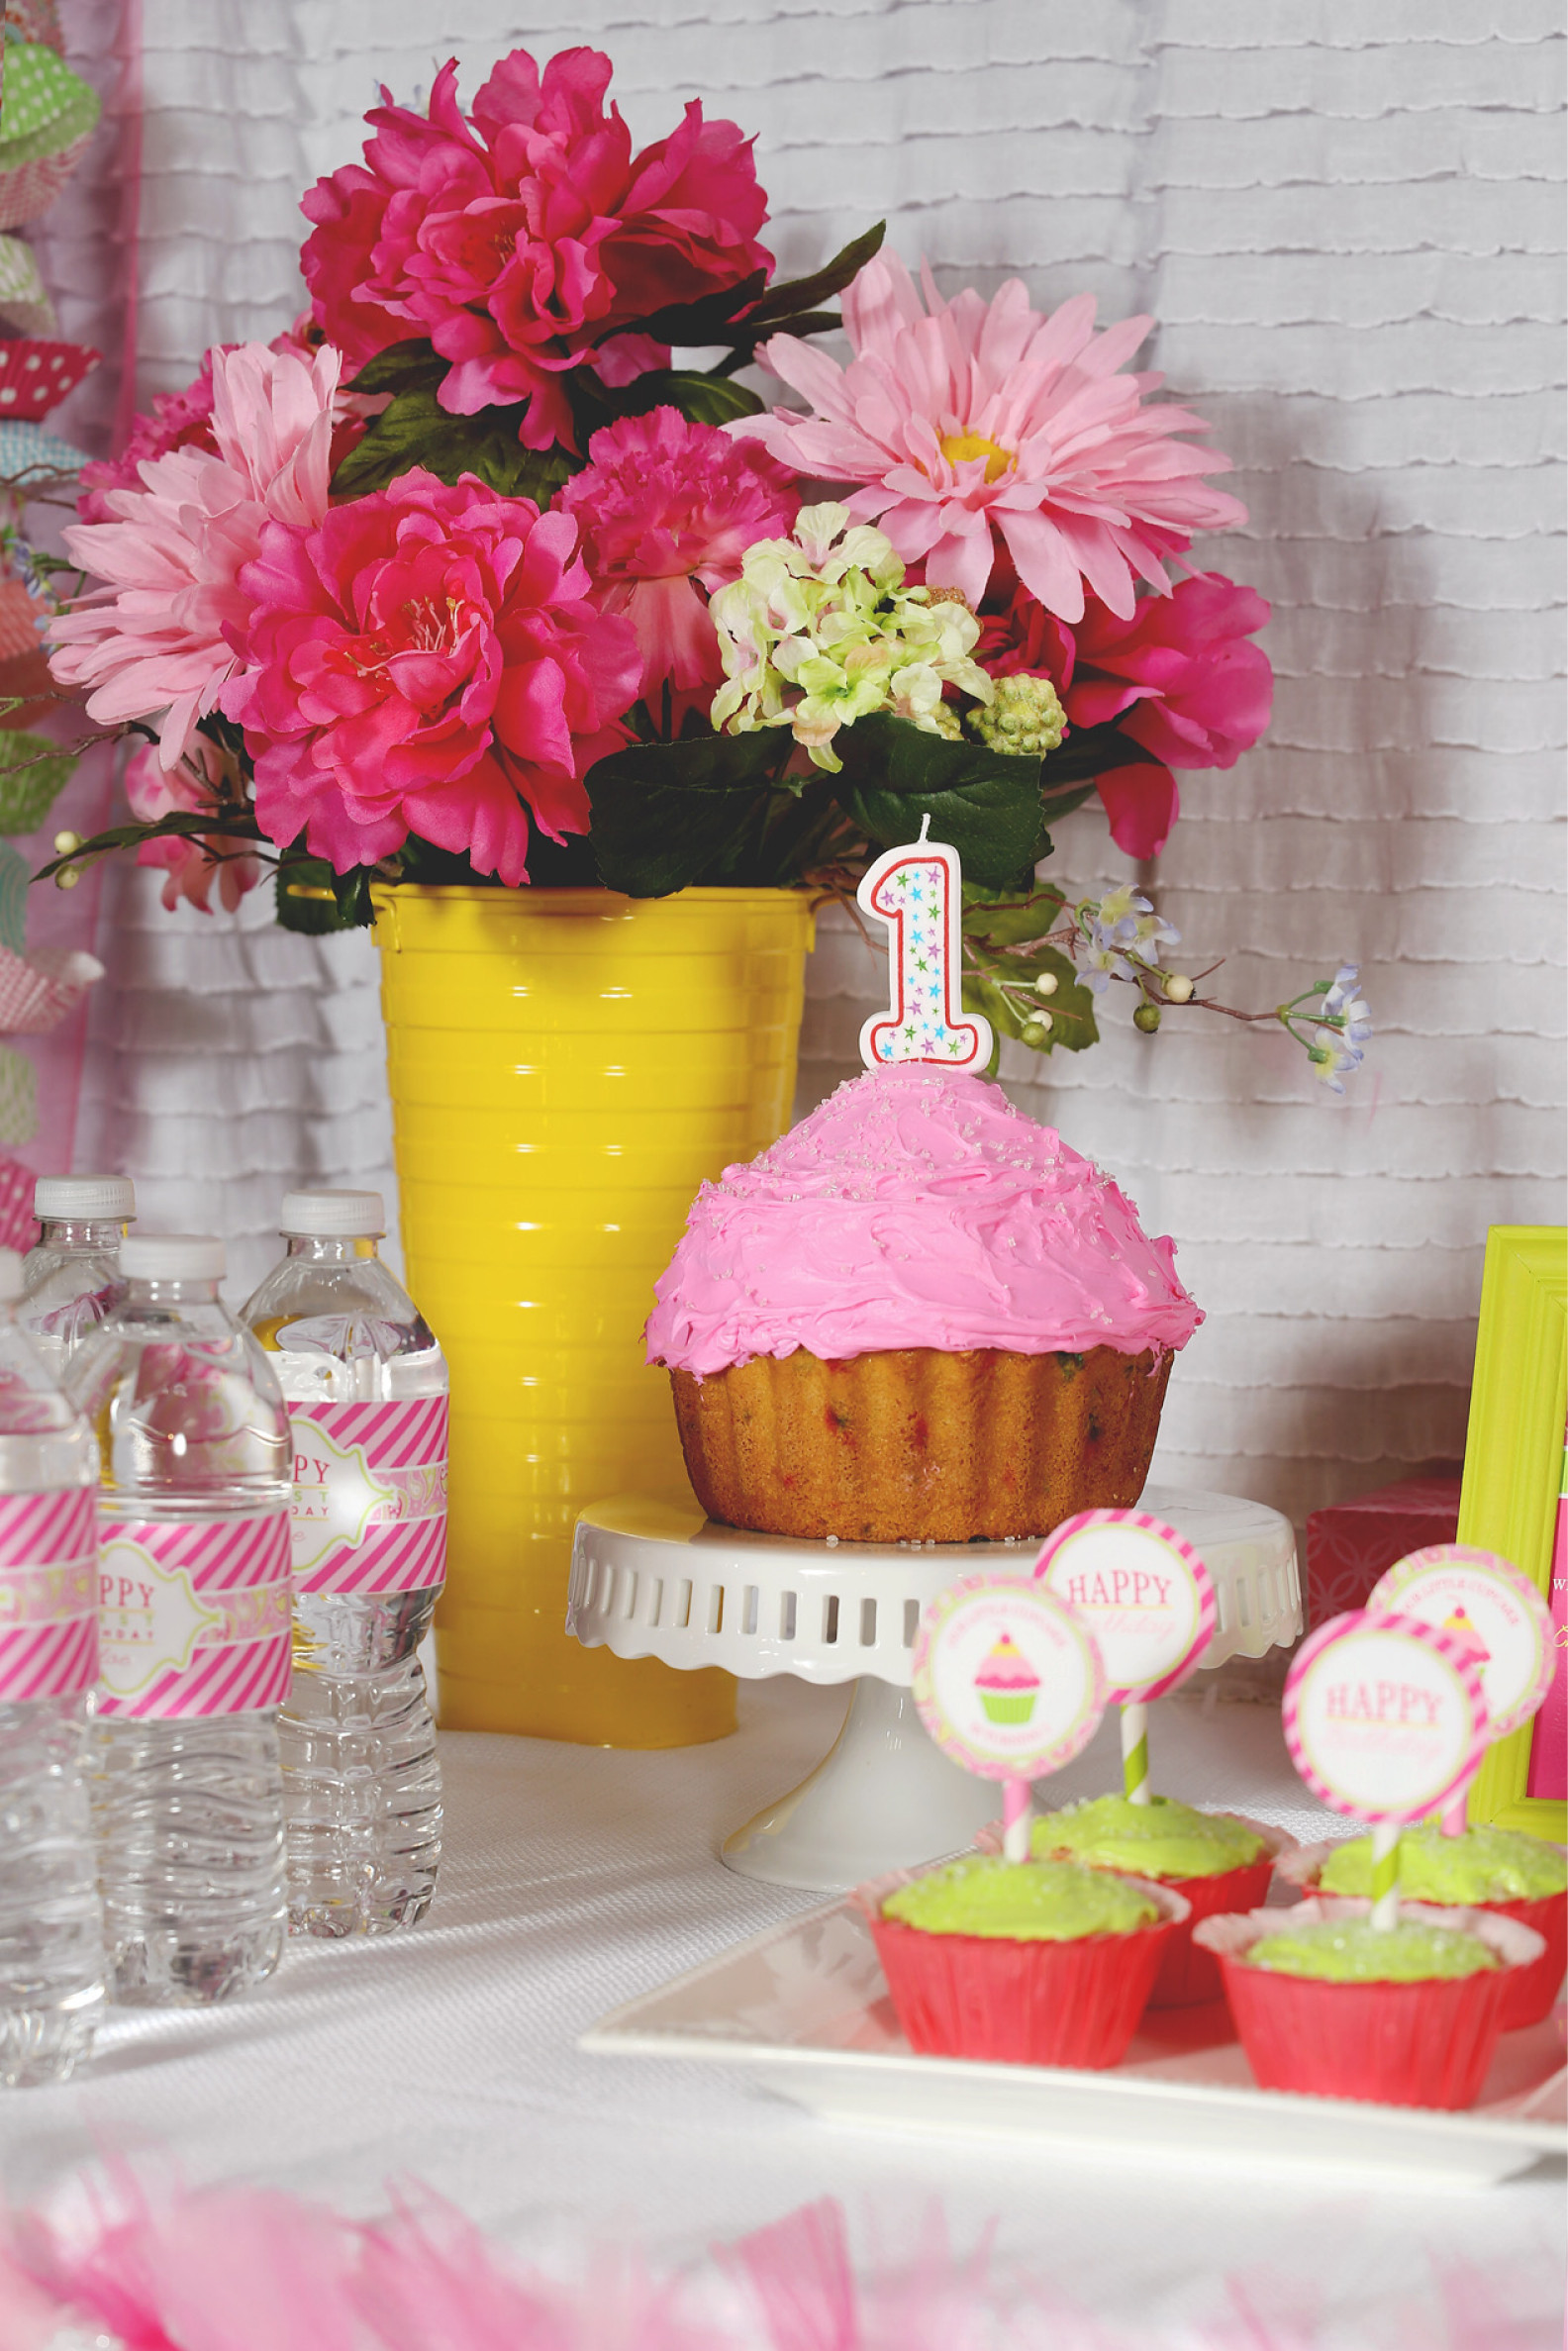 Cupcake Birthday Party Ideas
 A Cupcake Themed 1st Birthday party with Paisley and Polka